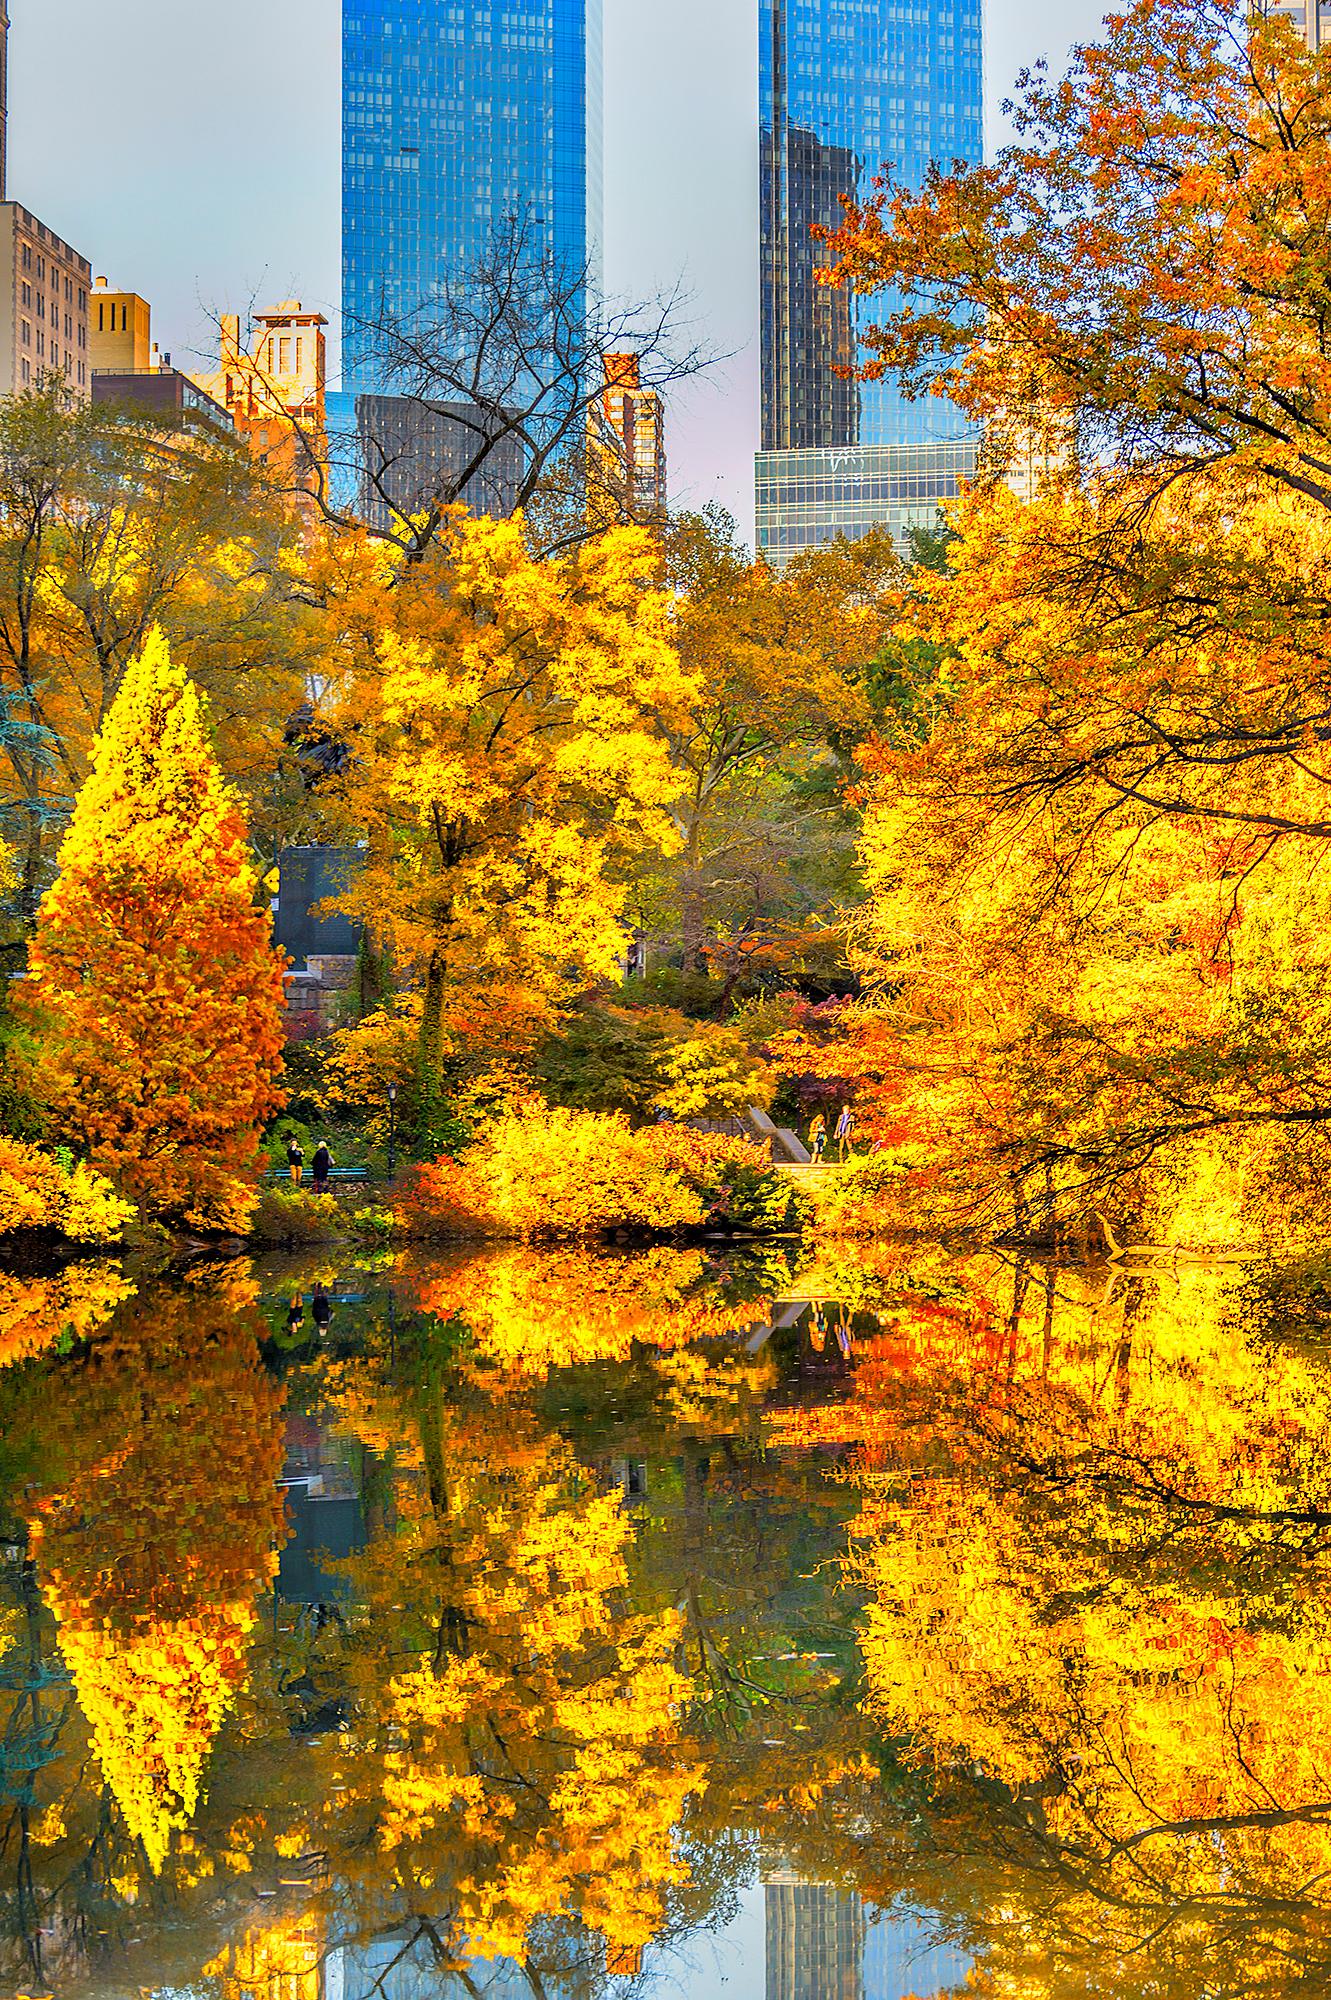 Mitchell Funk Landscape Photograph - Golden and Yellow Foliage in Central Park - Nature Photography